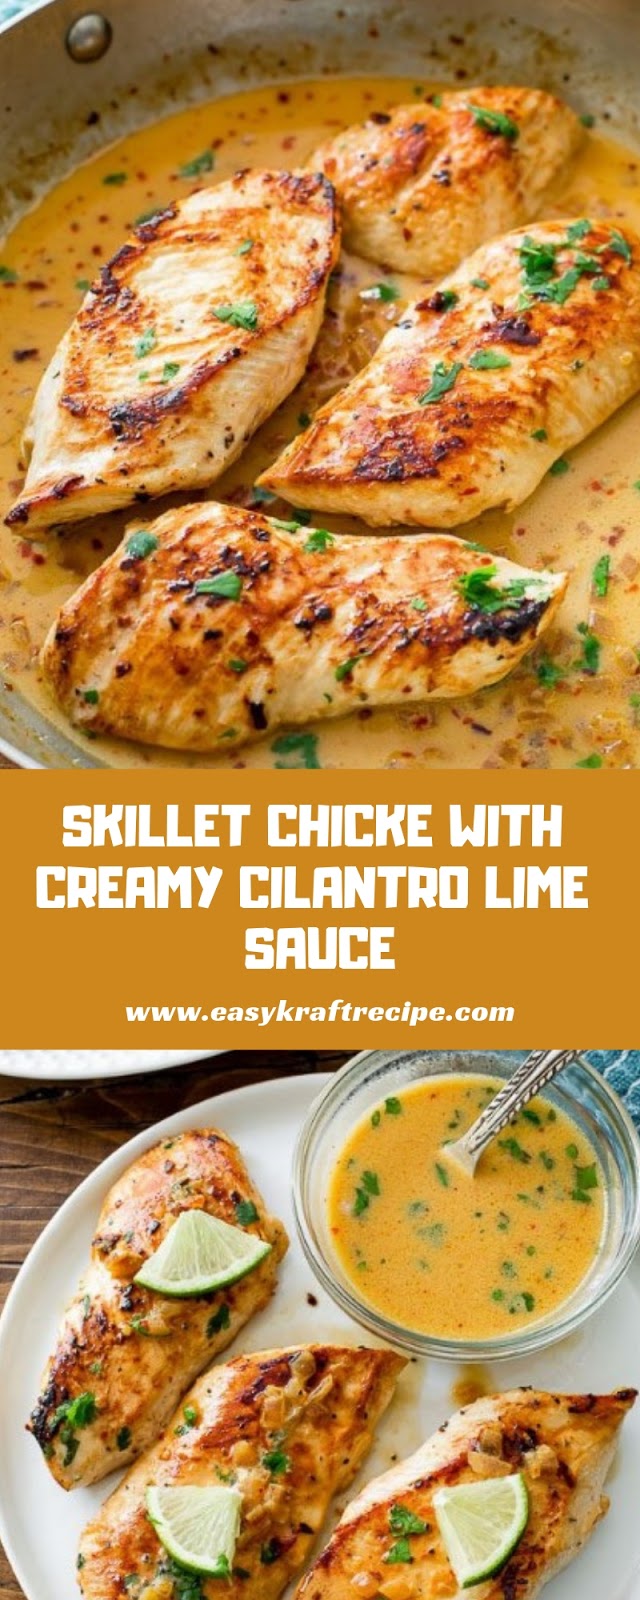 SKILLET CHICKEN WITH CREAMY CILANTRO LIME SAUCE